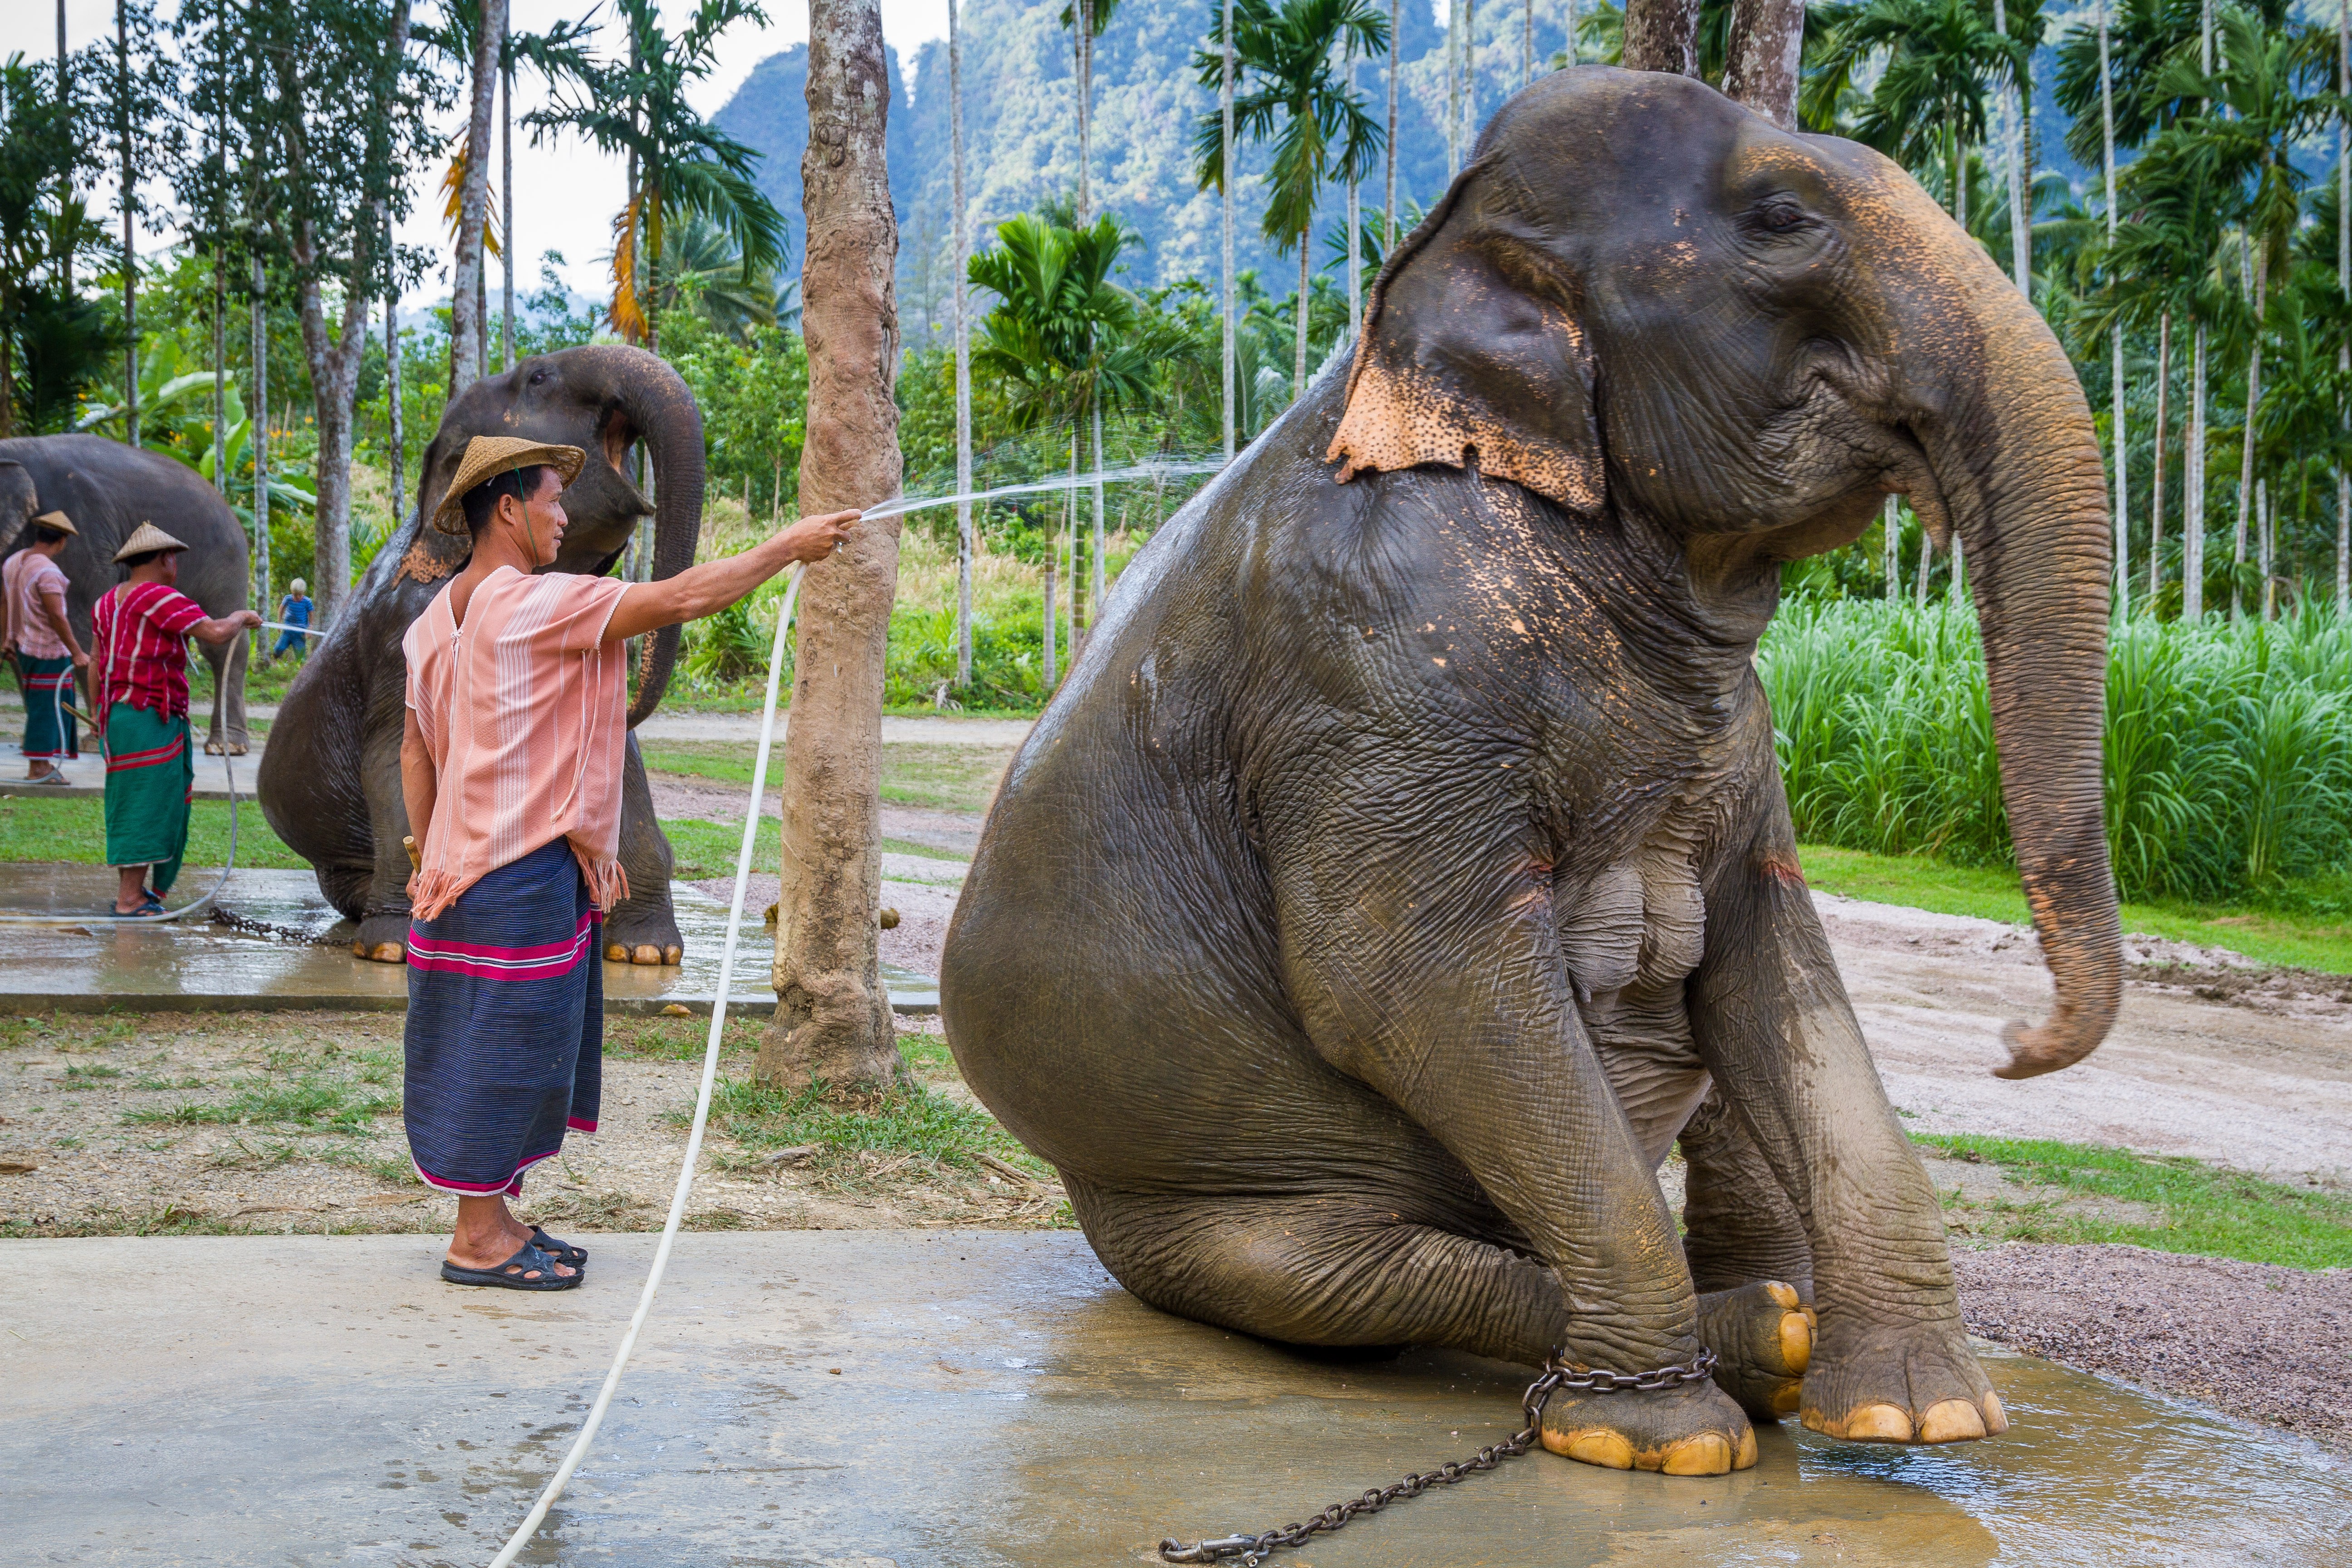 Mahout cleaning an elephant at Khao Sok, Thailand.